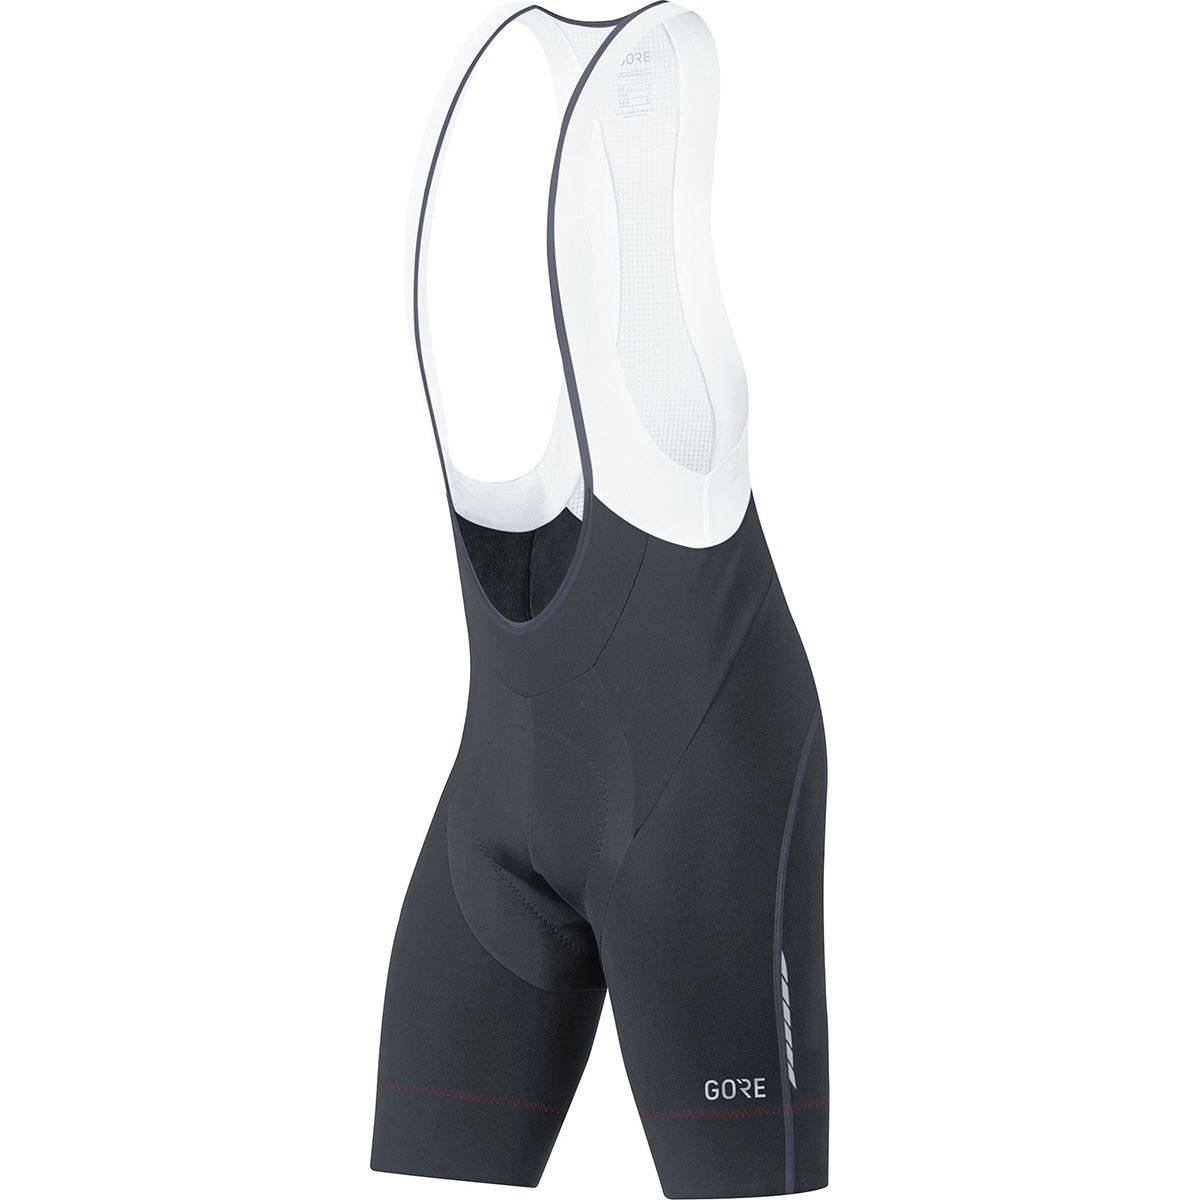 Gore Wear C7 Partial Thermo Bib Shorts+ - Men's